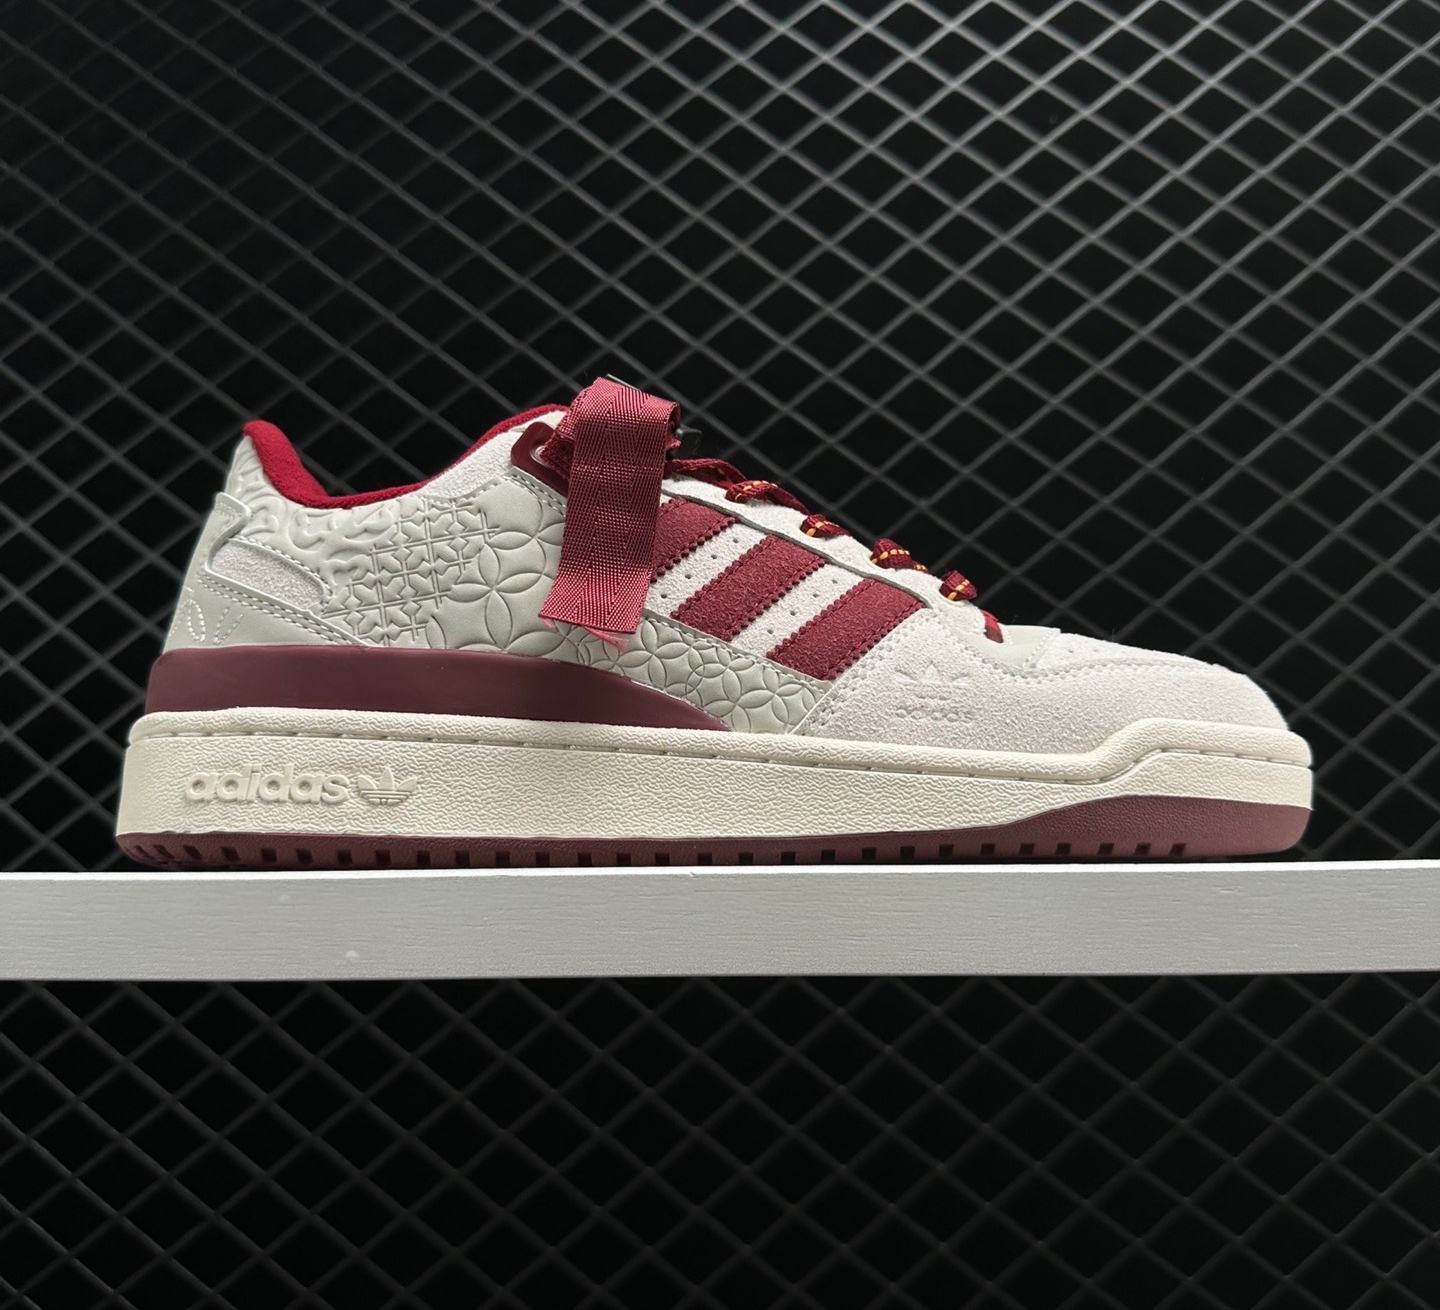 Adidas Originals Forum Low CNY Sneaker Unisex Beige White Red GX8866 - Stylish and Limited Edition